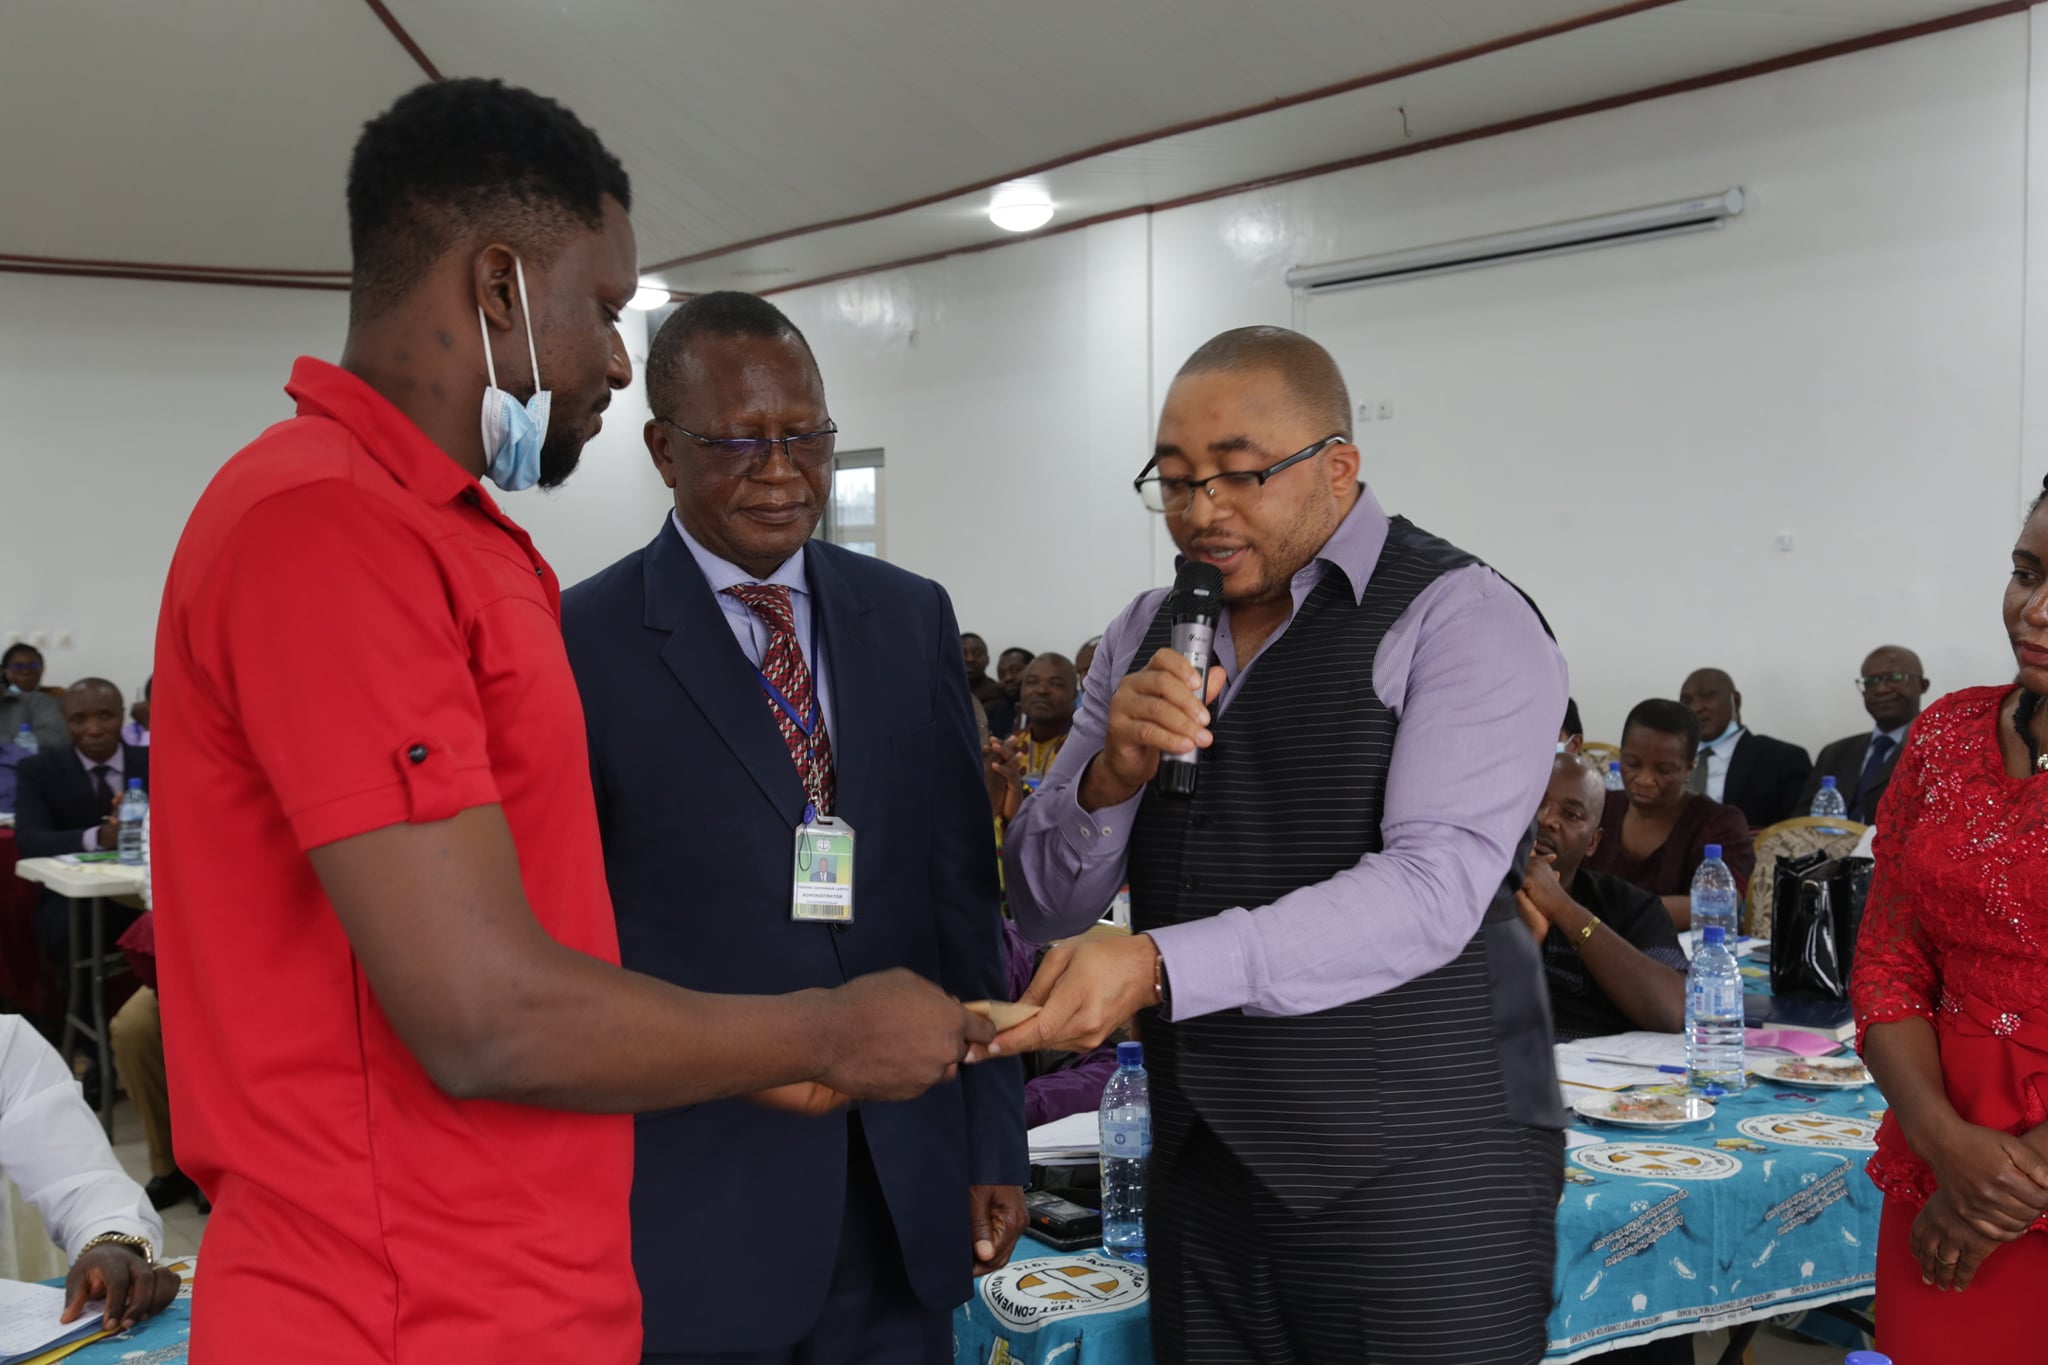 SPD Coordinator on behalf of the CBCHS hands fanacial support to the National Amputee Football team during the Chief of Centers meeting in Yaounde